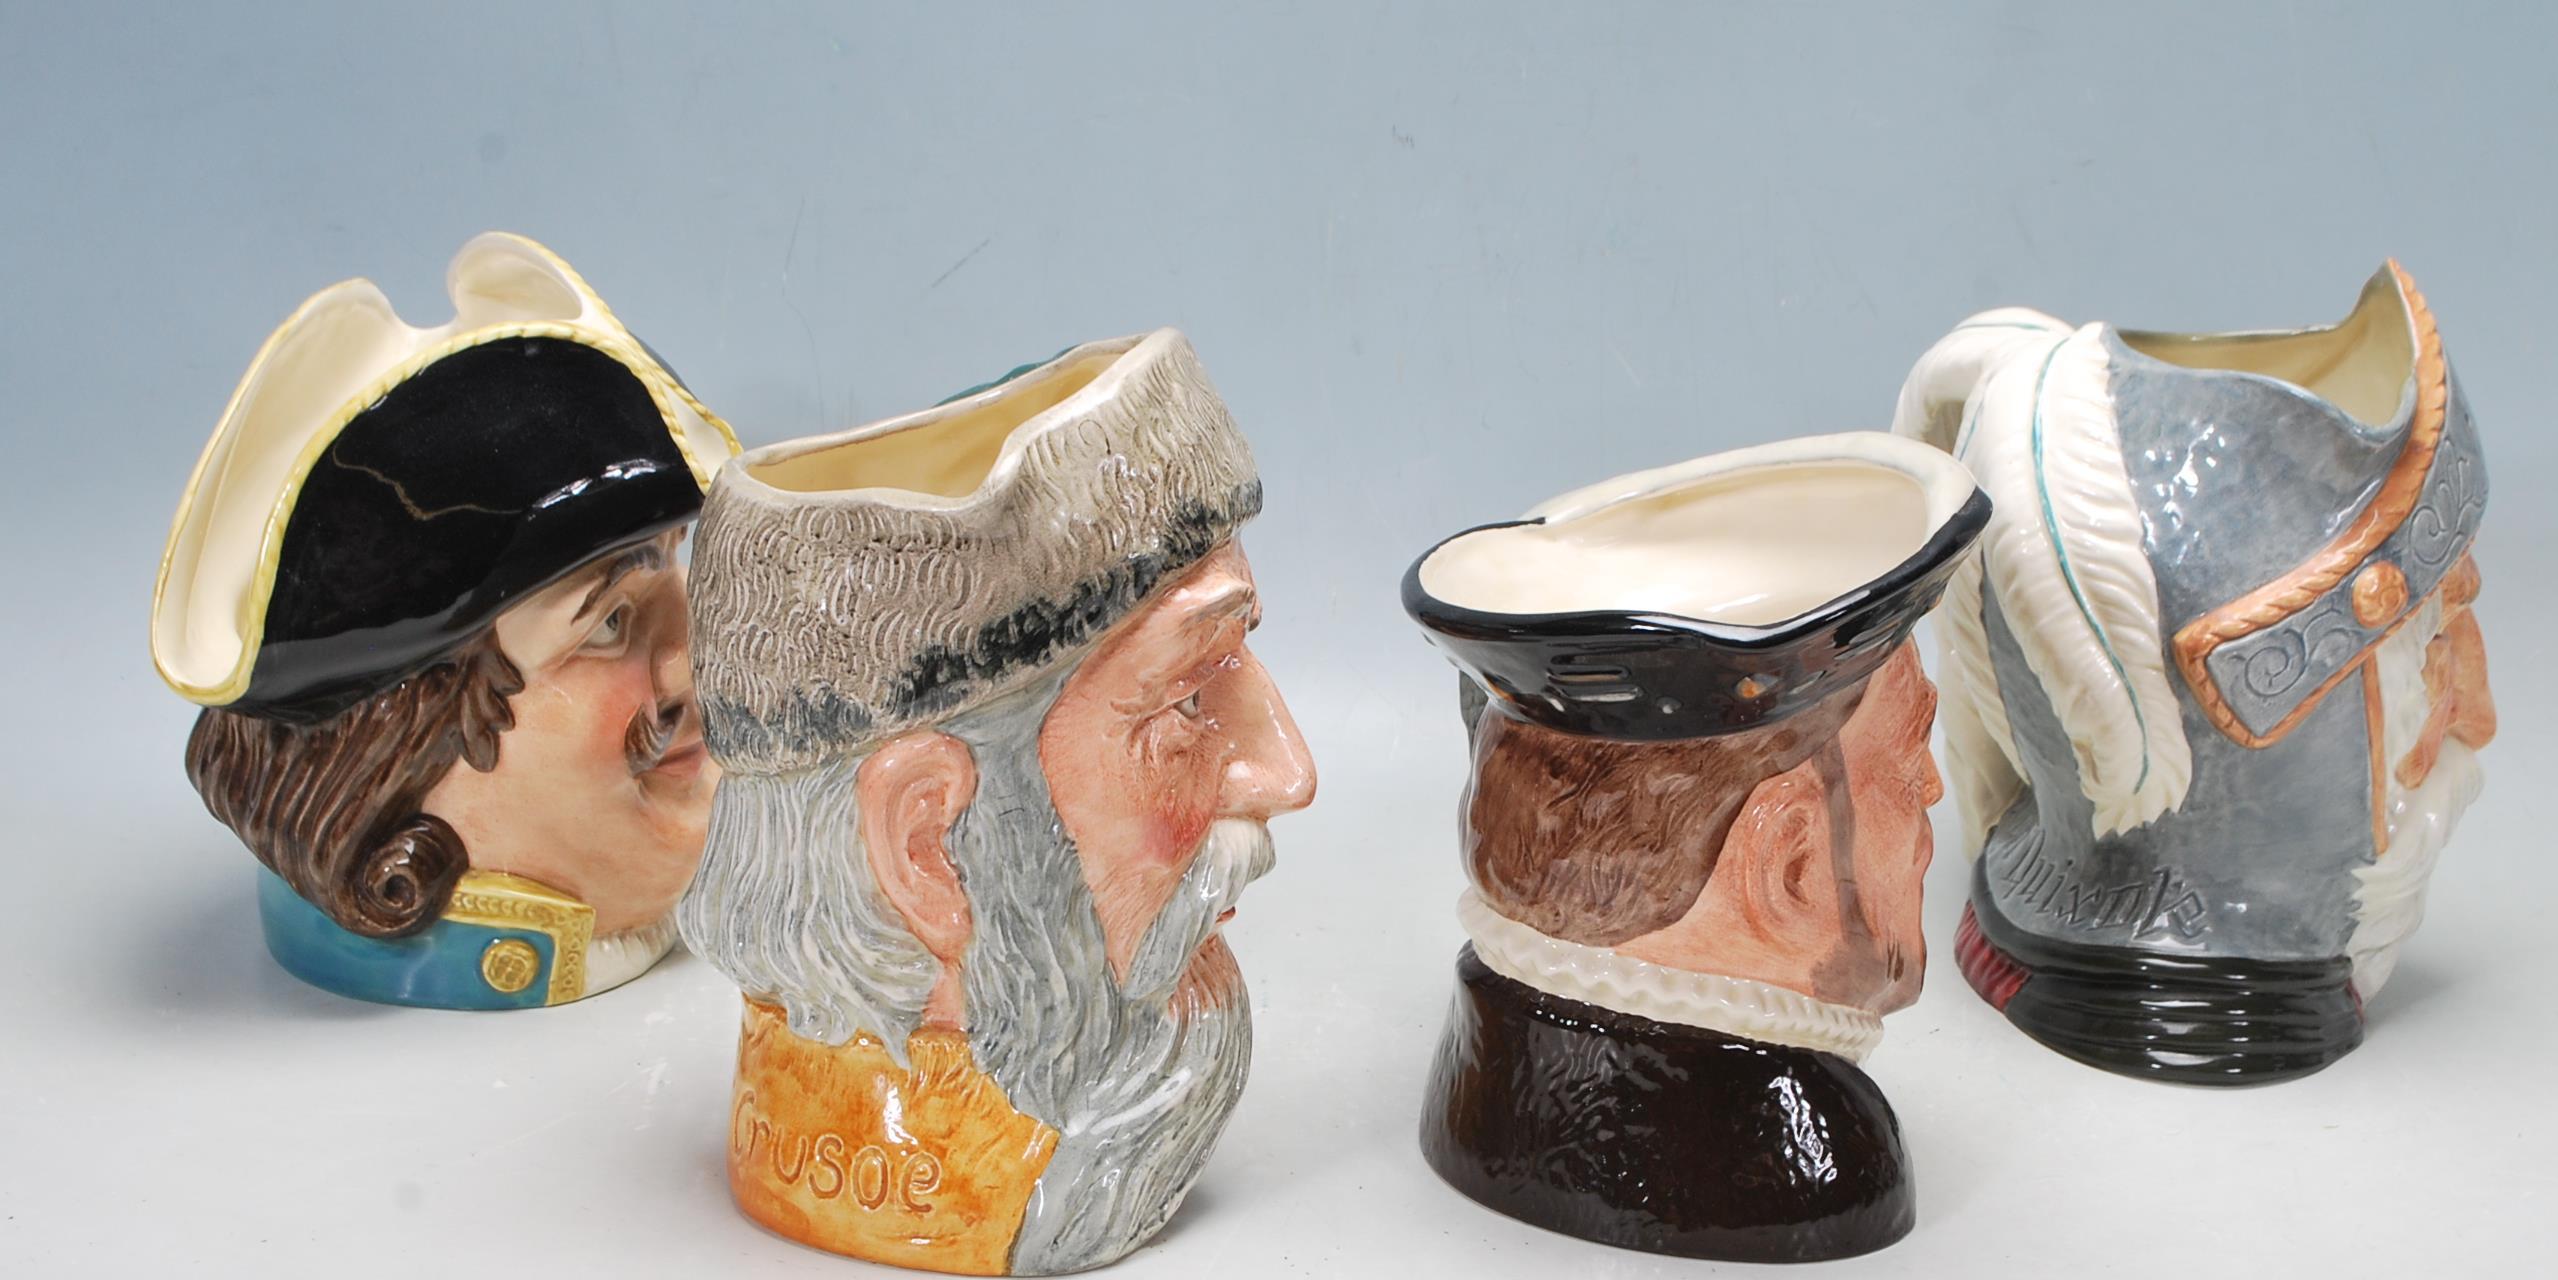 FOUR ROYAL DOULTON CHARACTER JUGS / TOBY JUGS - Image 2 of 6